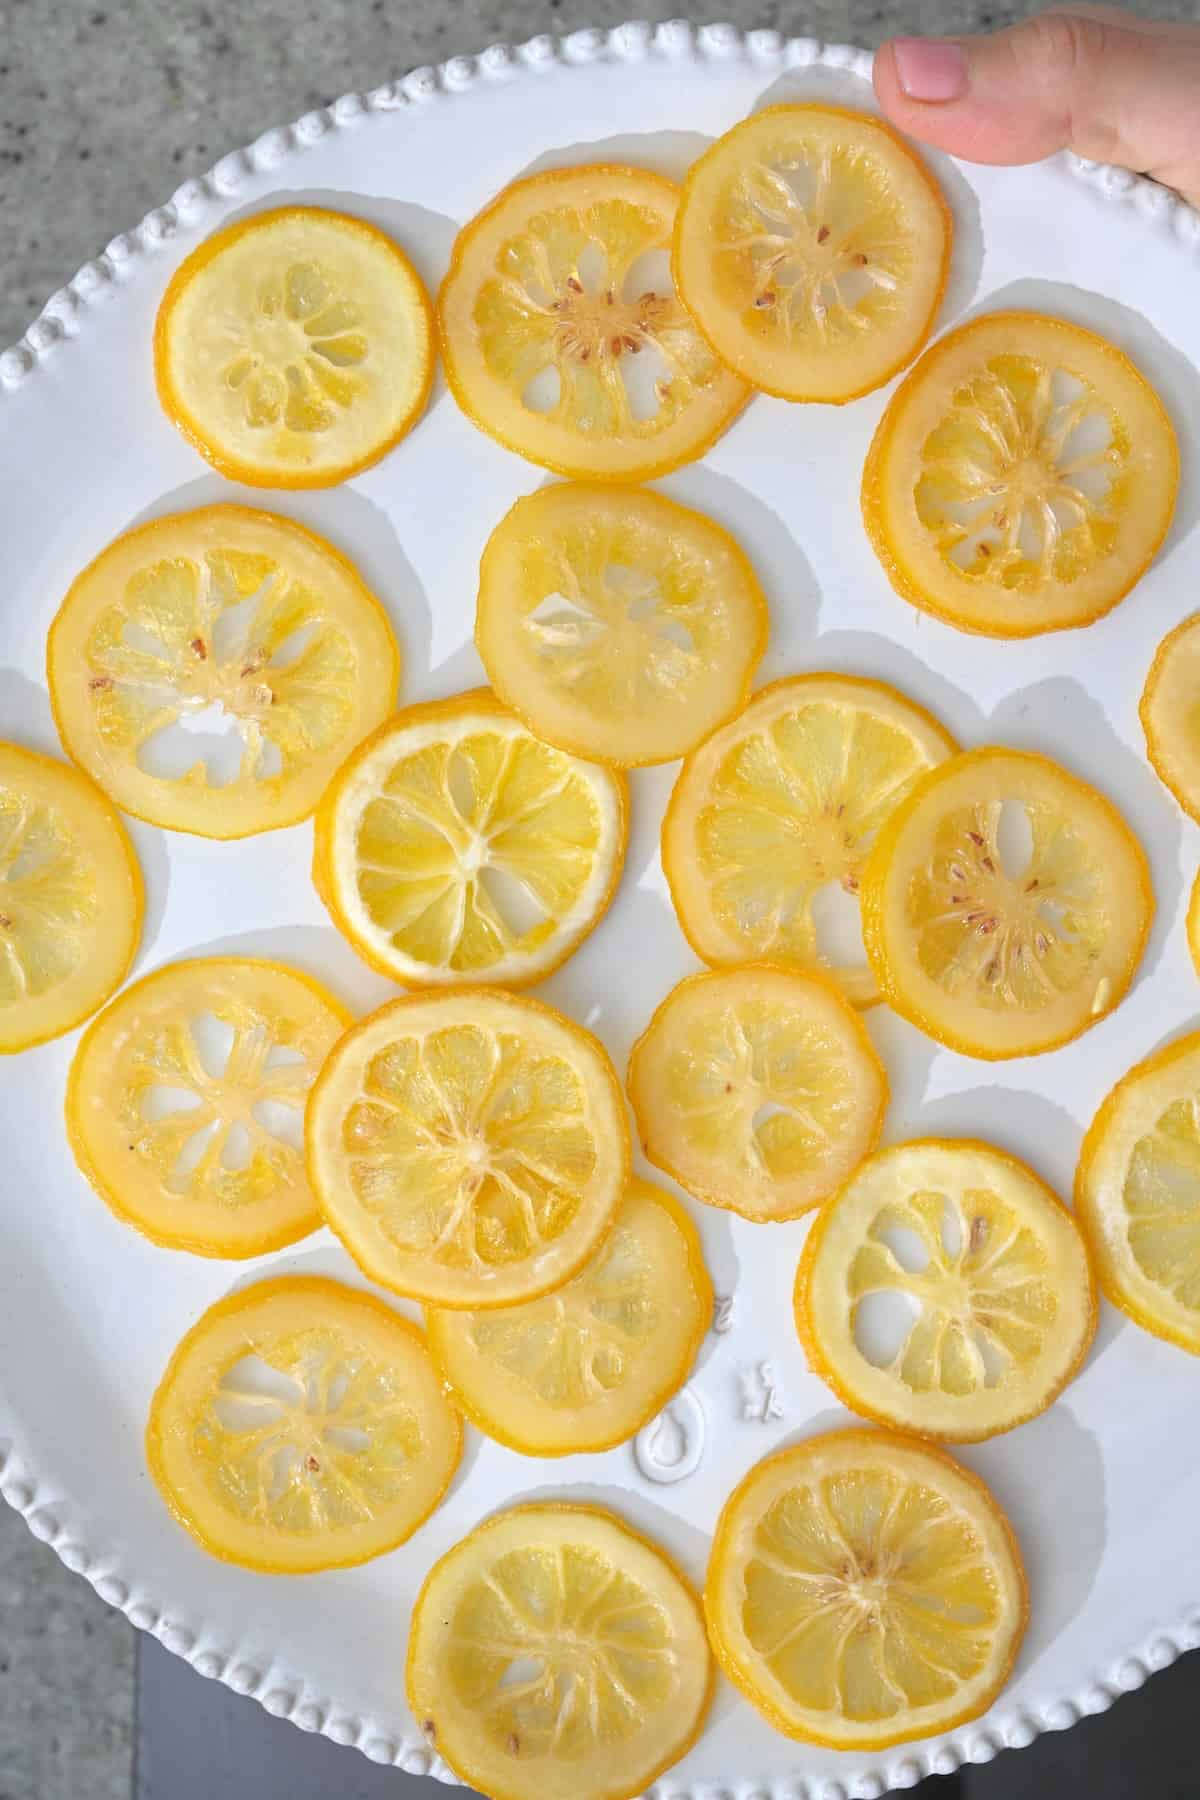 Candied lemon spread on a plate